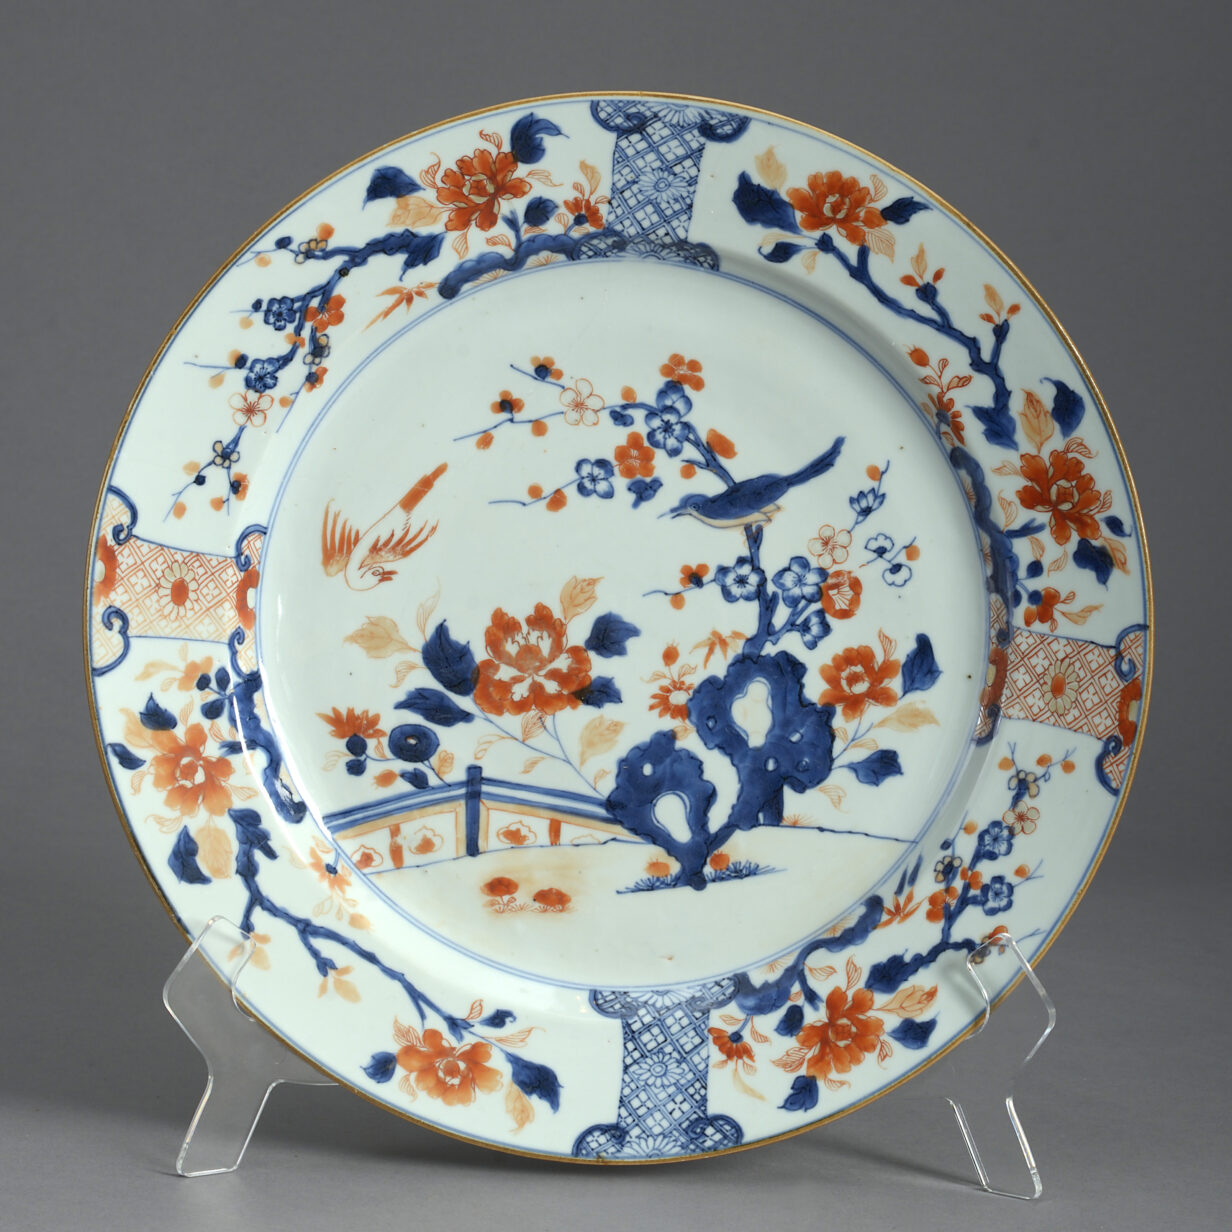 Mid-18th century chinese imari porcelain charger